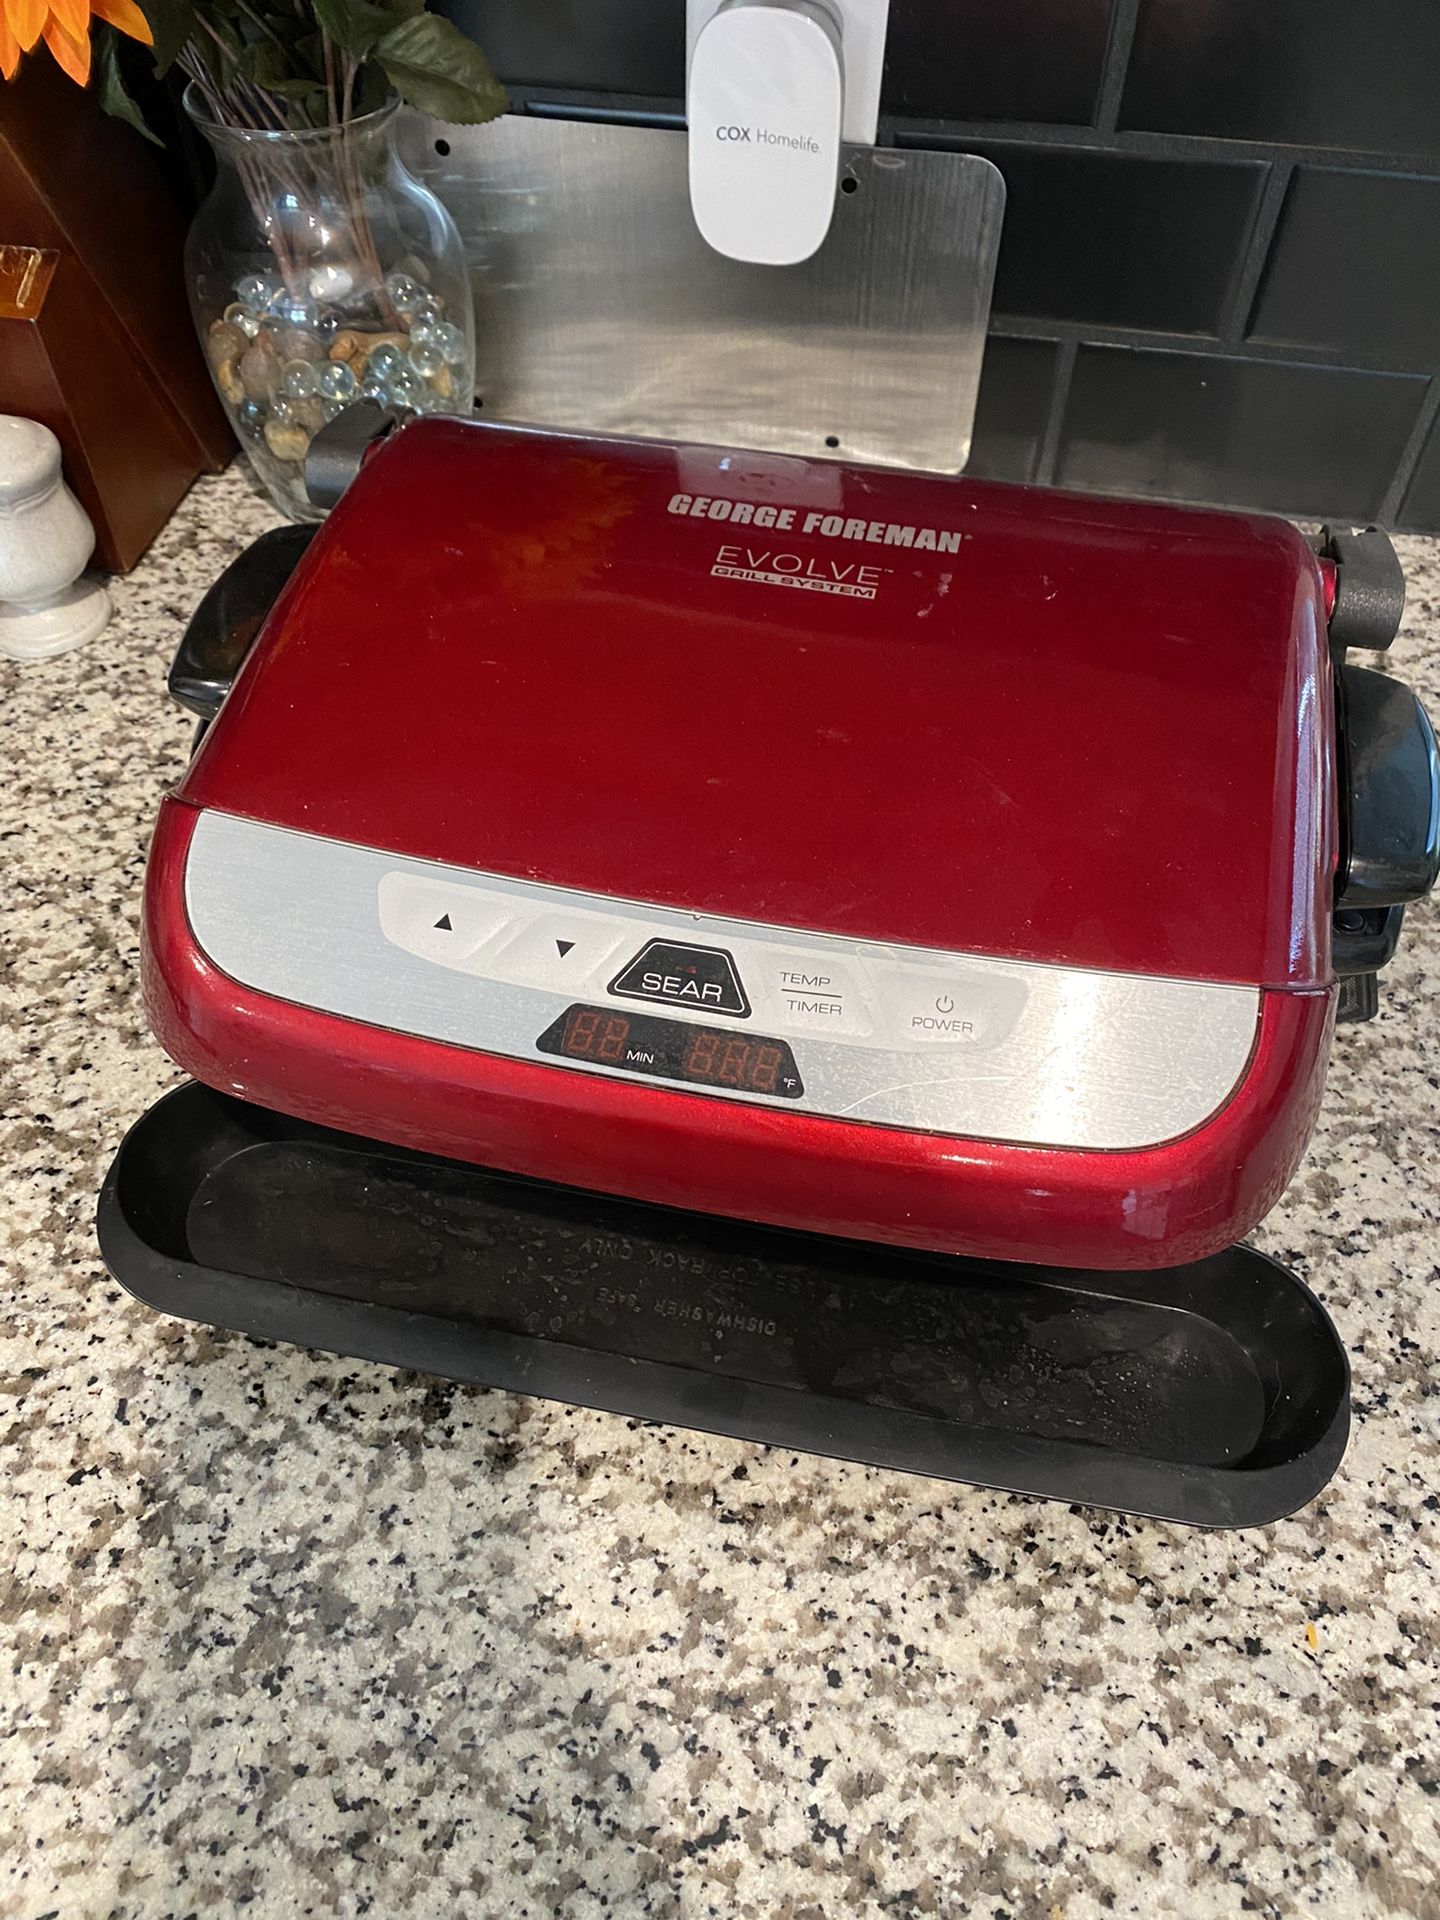 George Foreman Grill $50